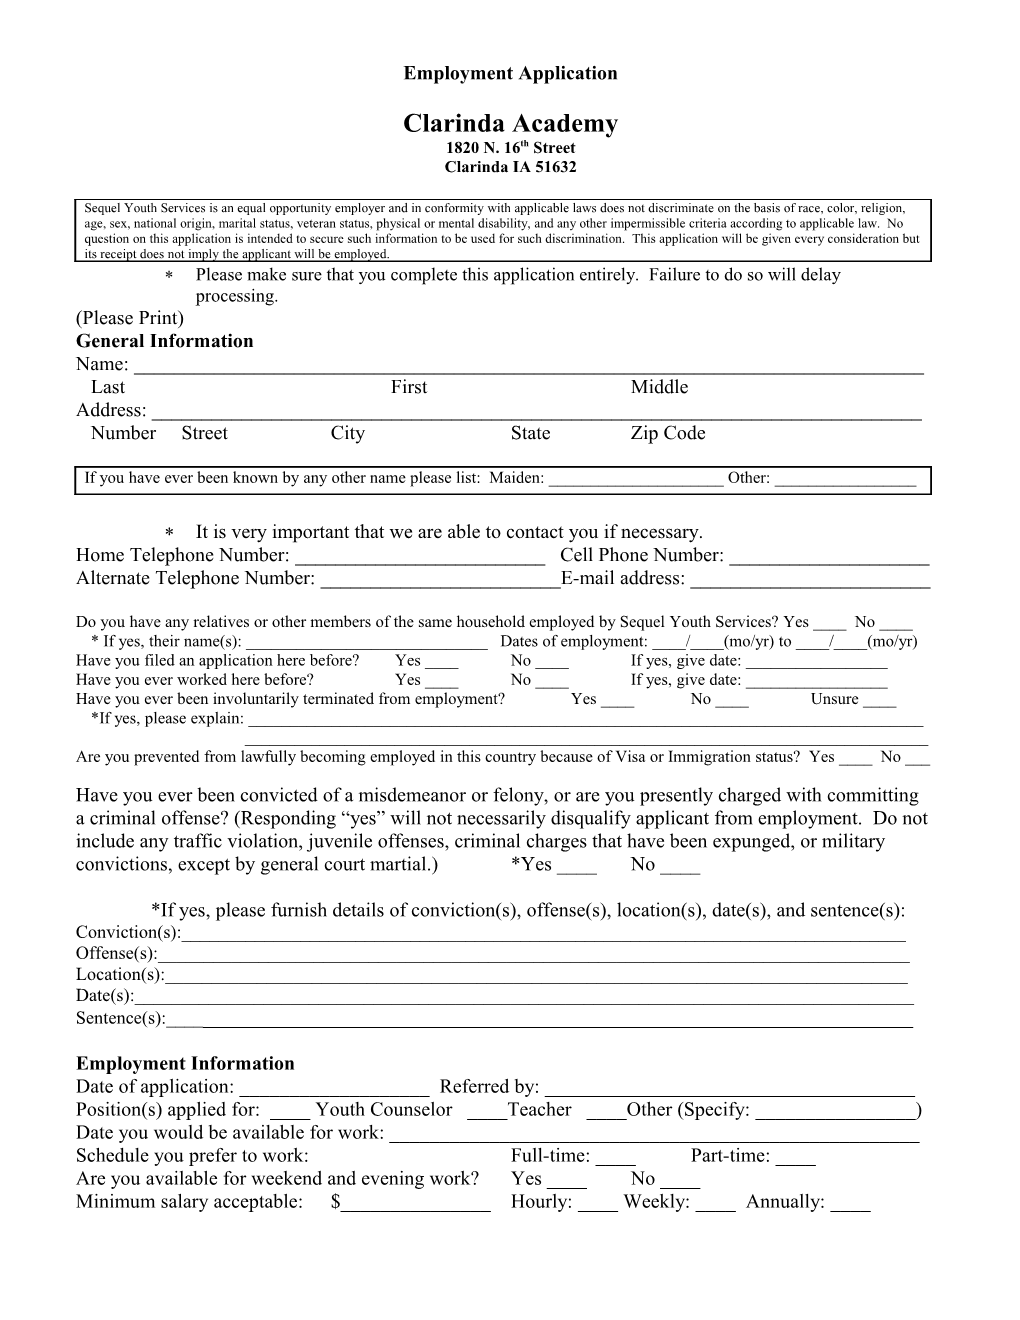 Sequel Youth Services Employment Application